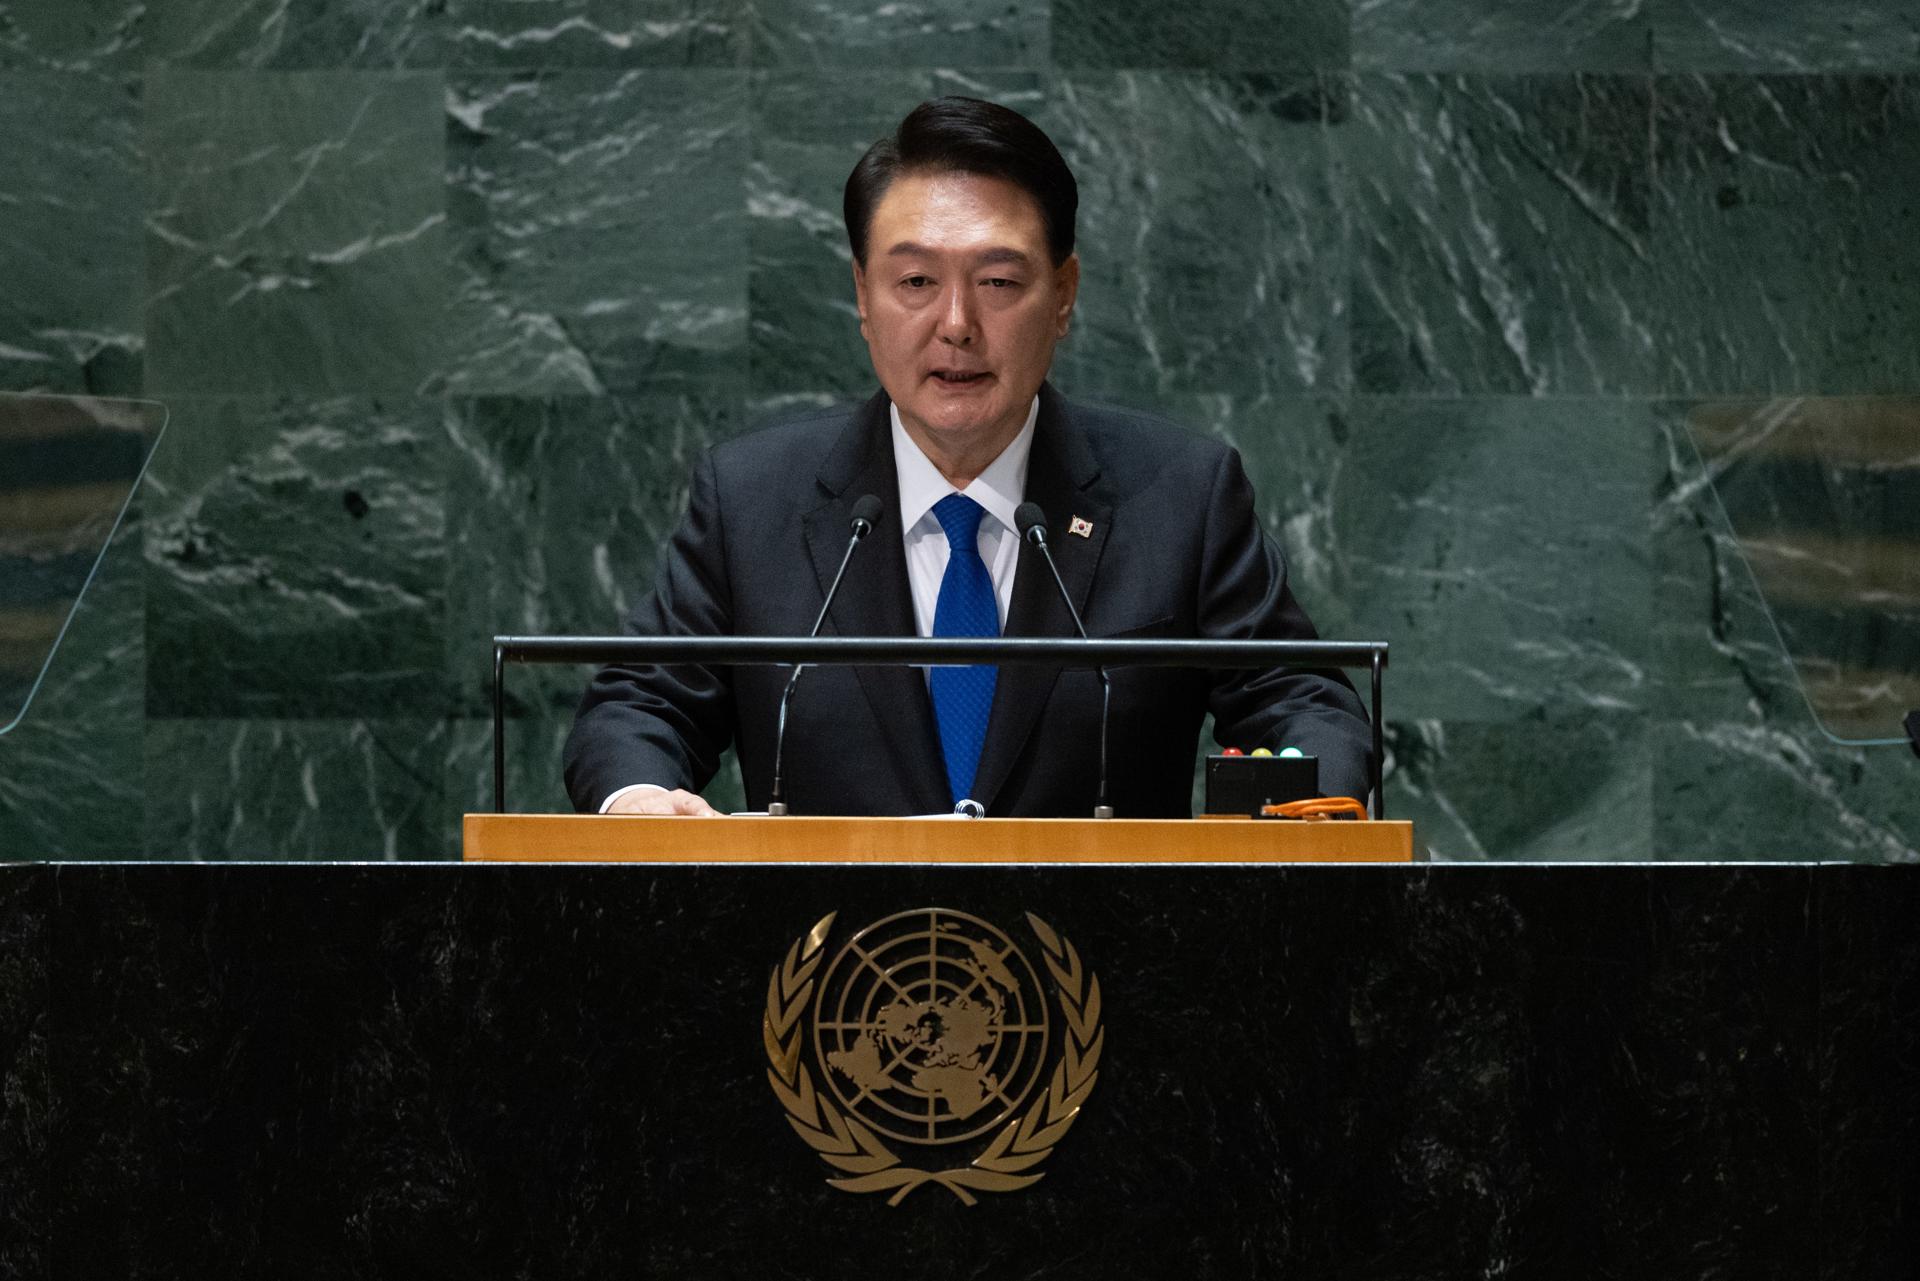 President of South Korea Yoon Suk Yeol speaks during the 78th session of the United Nations General Assembly at United Nations Headquarters in New York, New York, US, 20 September 2023. EFE-EPA/ADAM GRAY